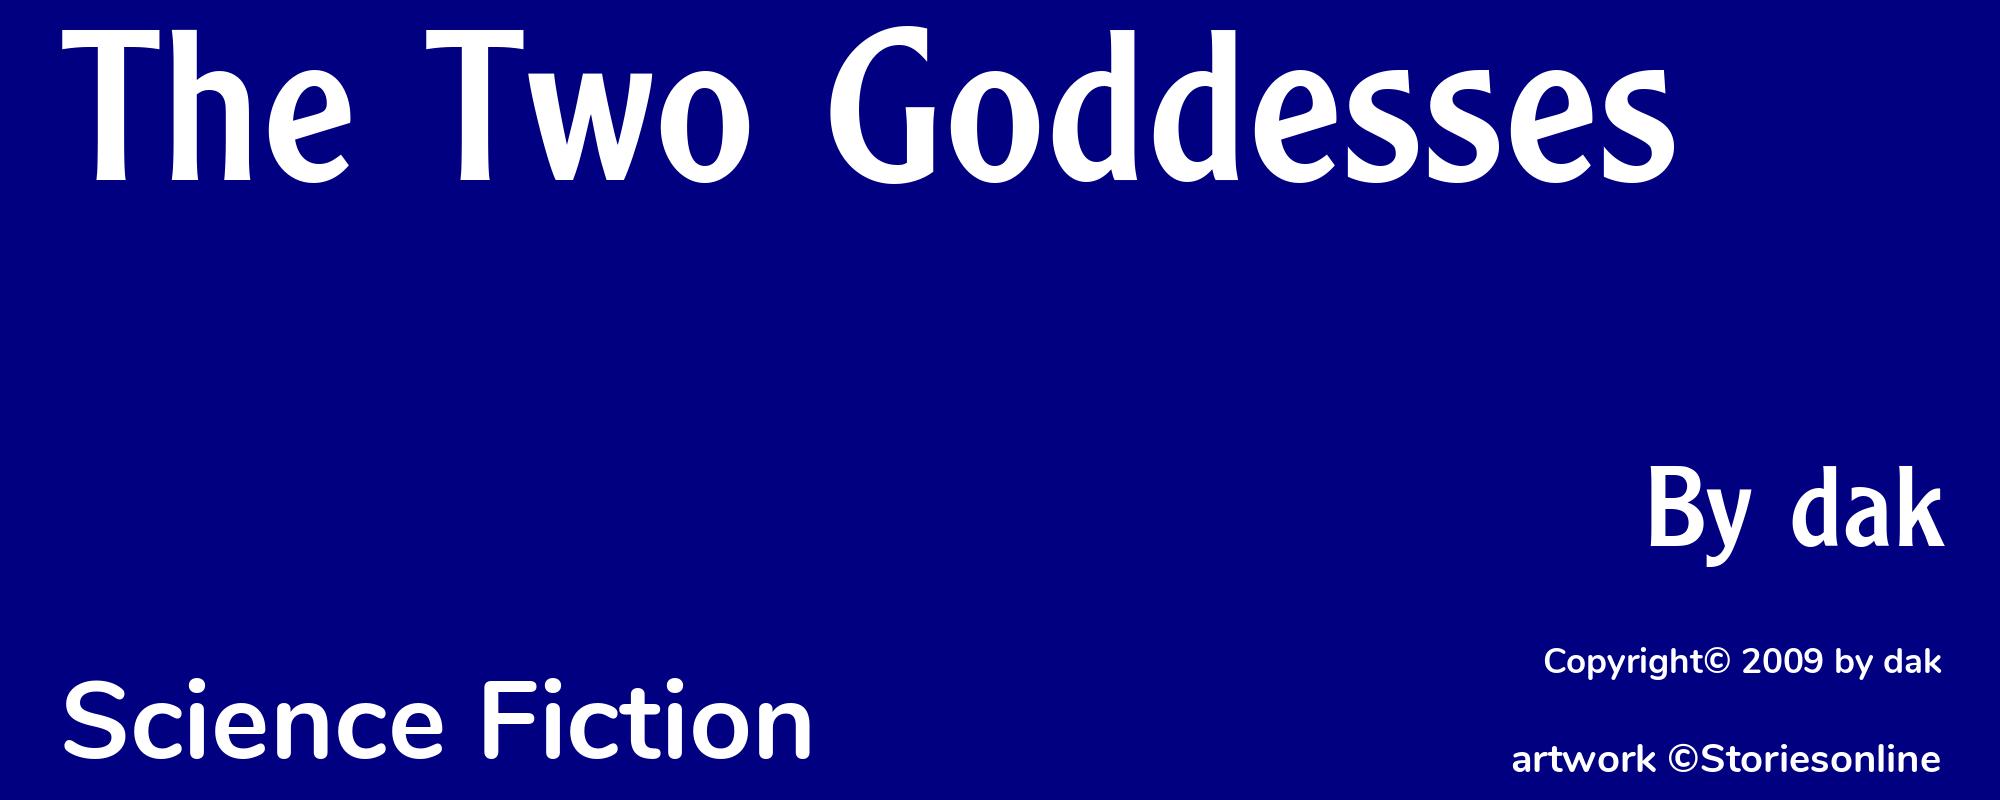 The Two Goddesses - Cover